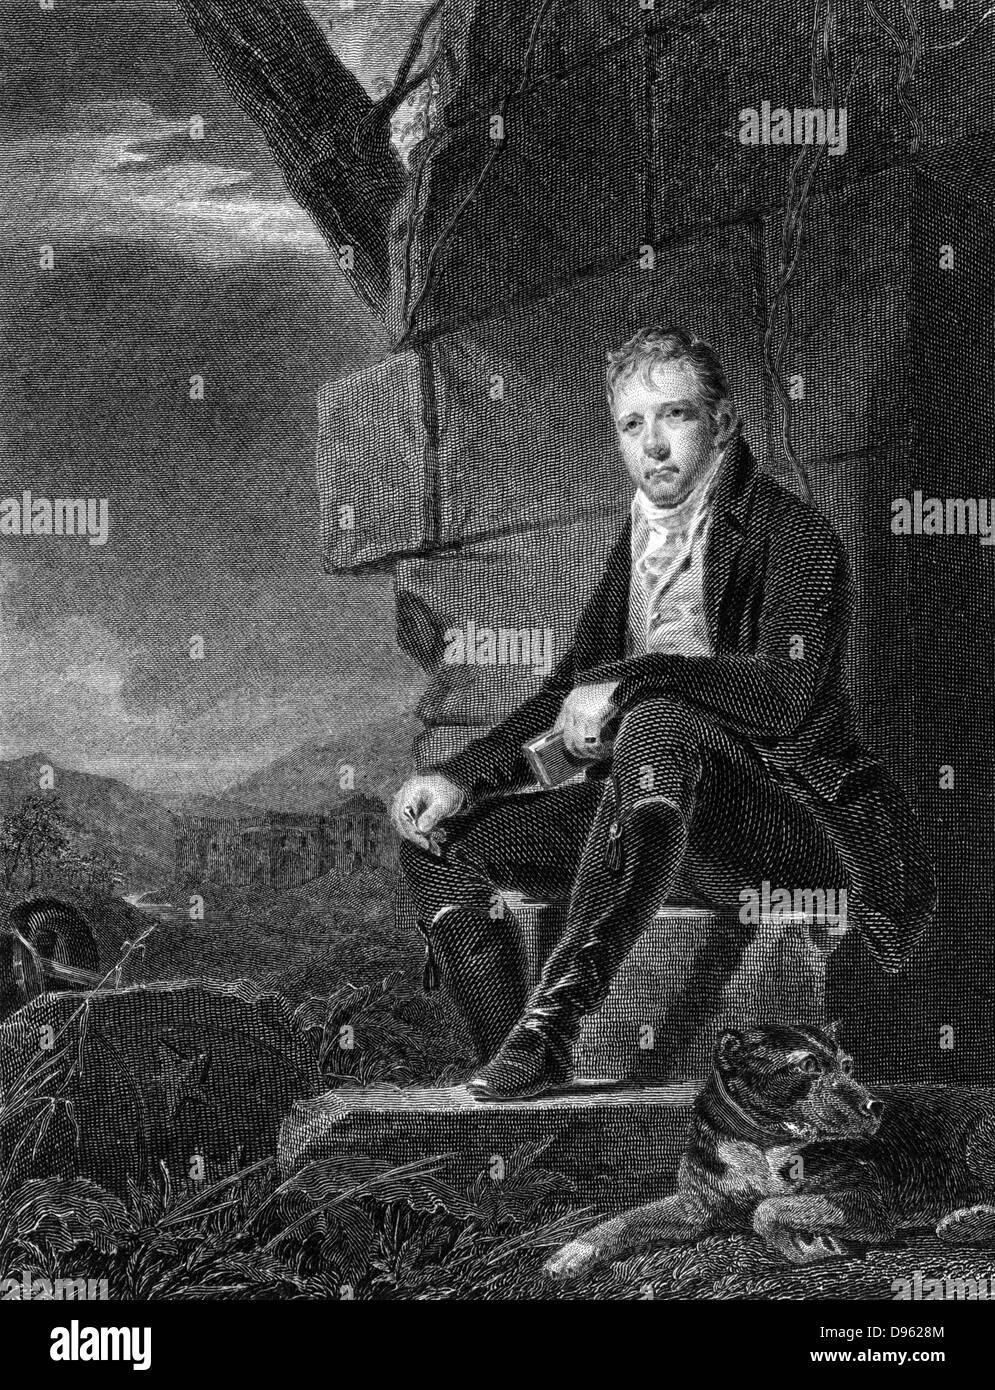 Walter Scott (1771-1832) Scottish poet and novelist: seated on stone, accompanied by dog, in 1808, the year his poem 'Marmion' was published. Steel engraving after portrait by Raeburn. Stock Photo